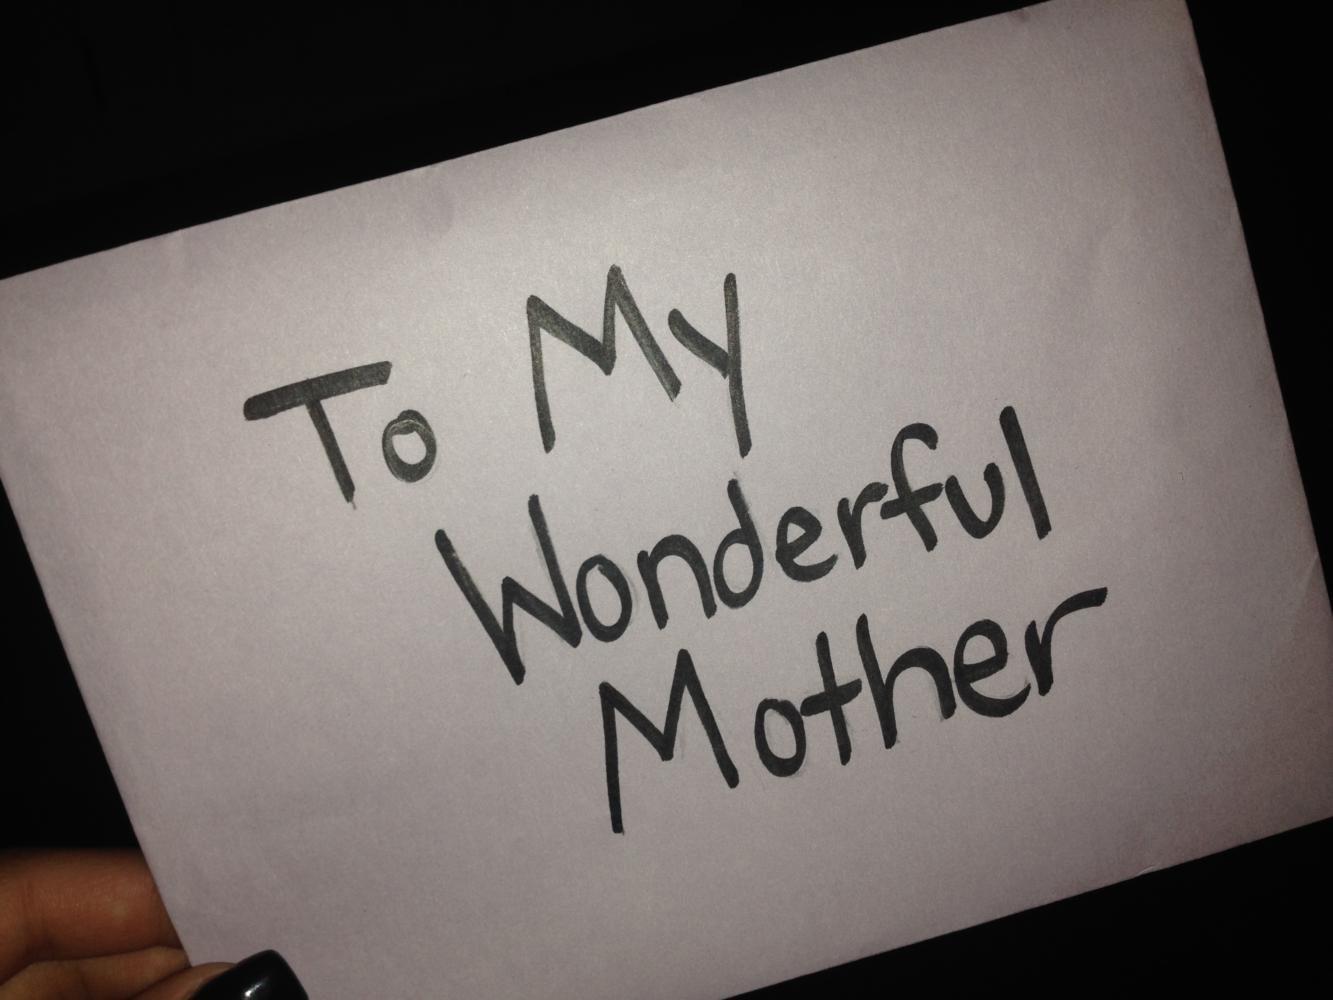 Children often show their appreciation for their mothers by getting them a gift or making homemade cards.